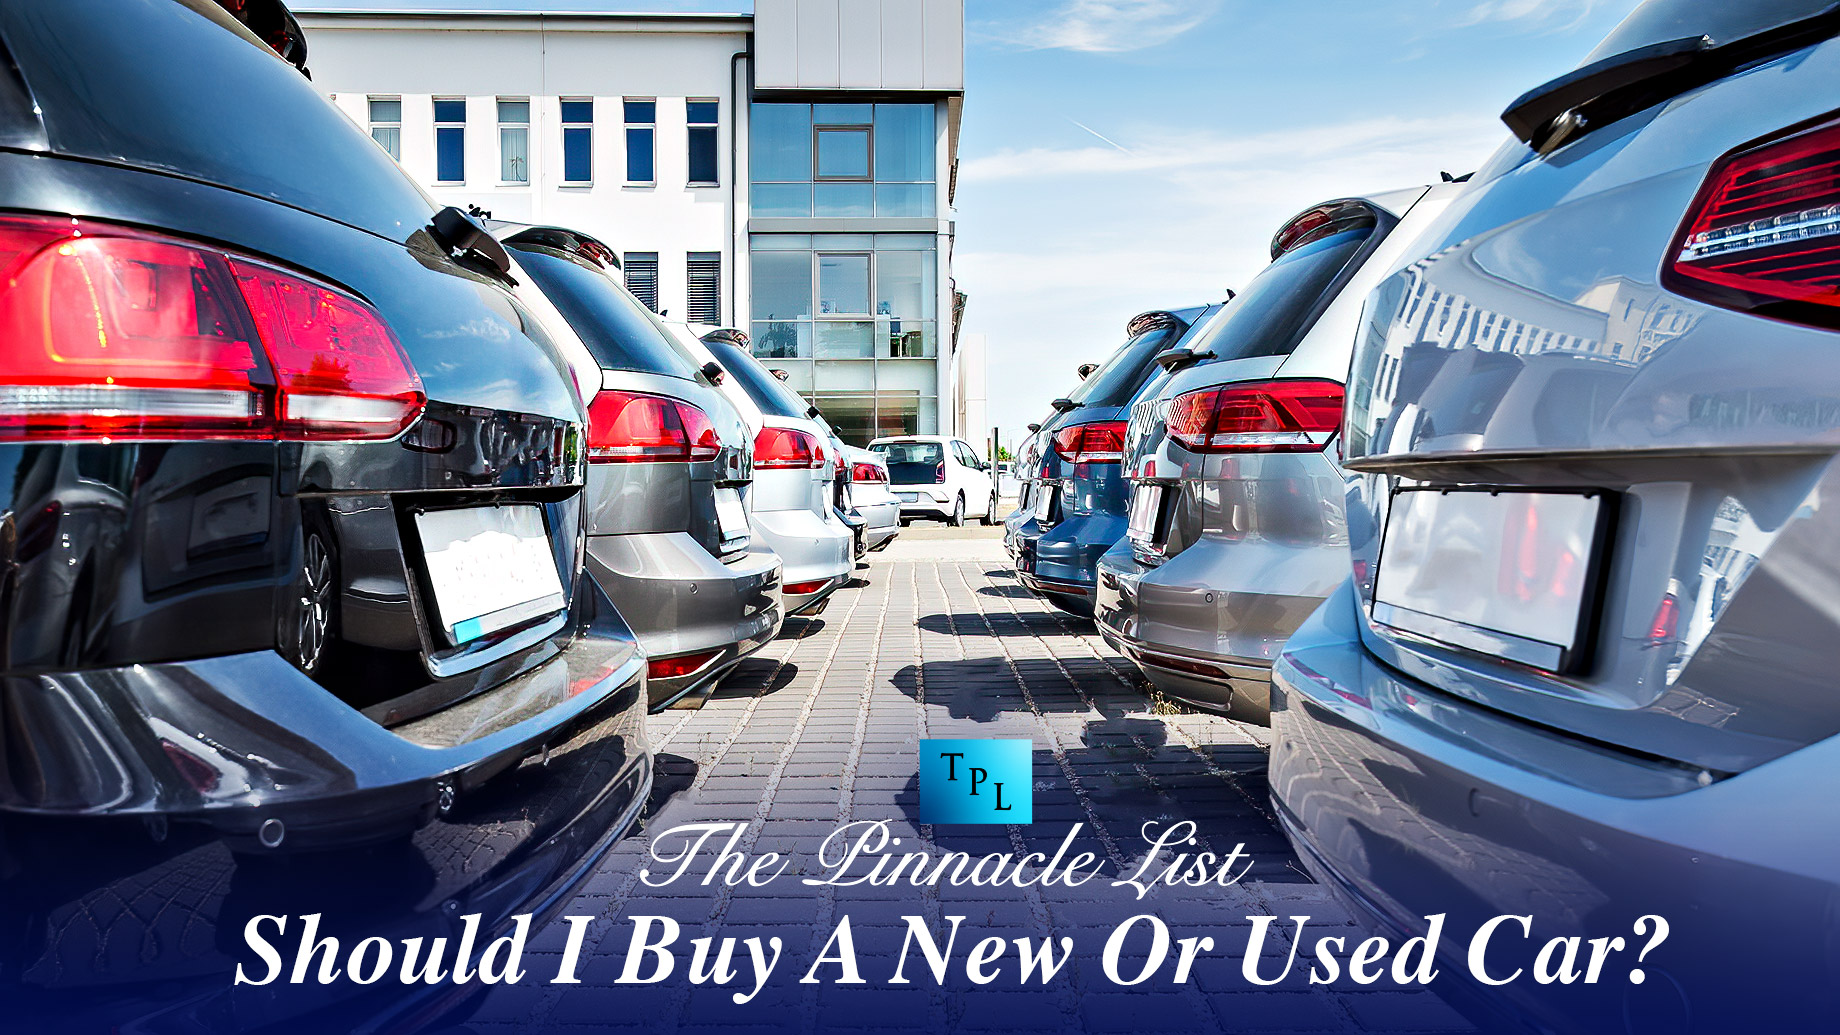 Should I Buy A New Or Used Car?